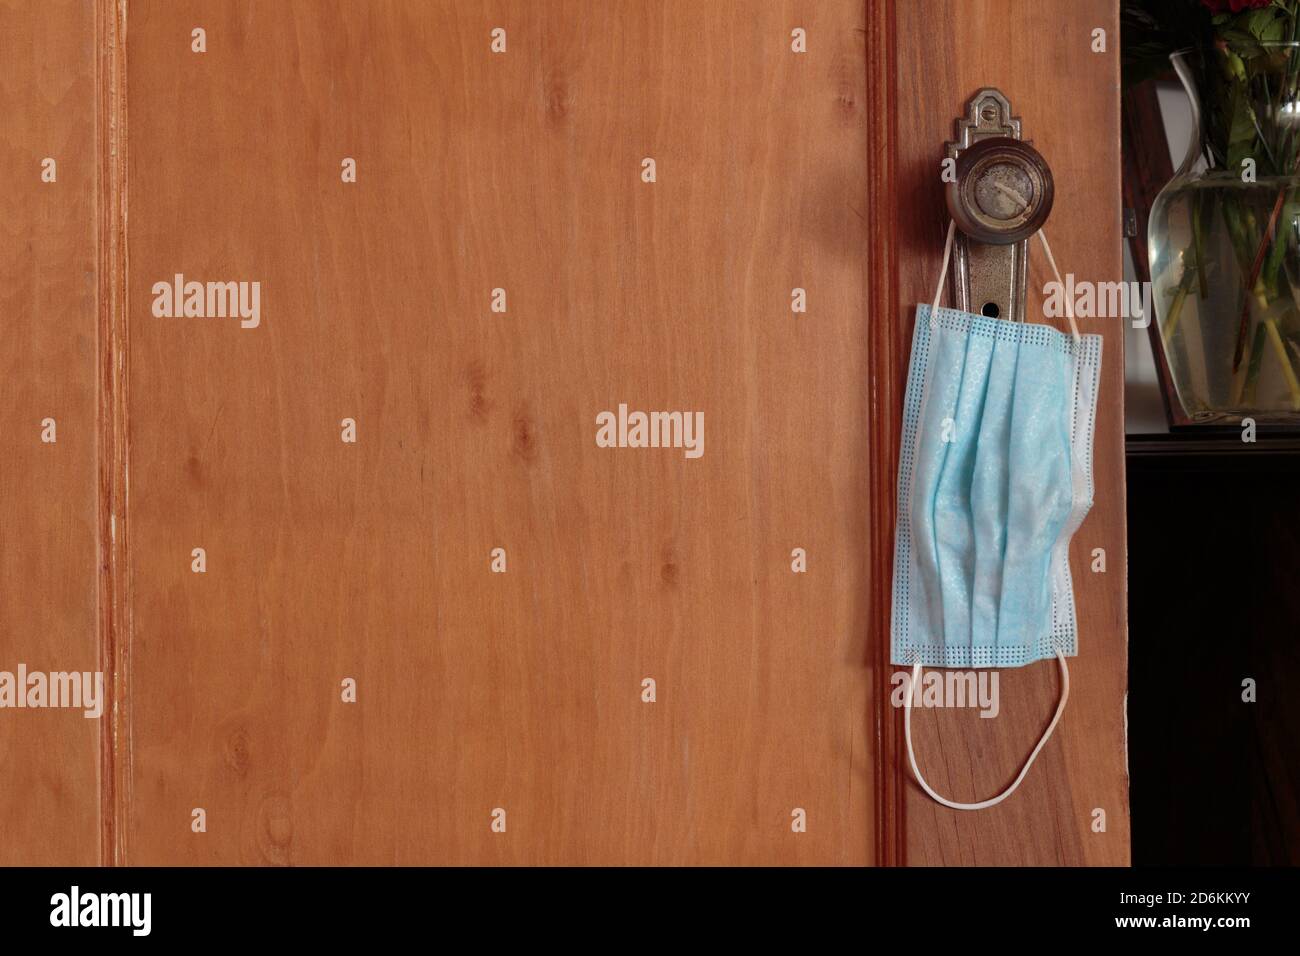 a blue face mask hanging from a door knob on a wooden door next to a table, illustrating the intrusion of face masks in our lives during the pandemic Stock Photo